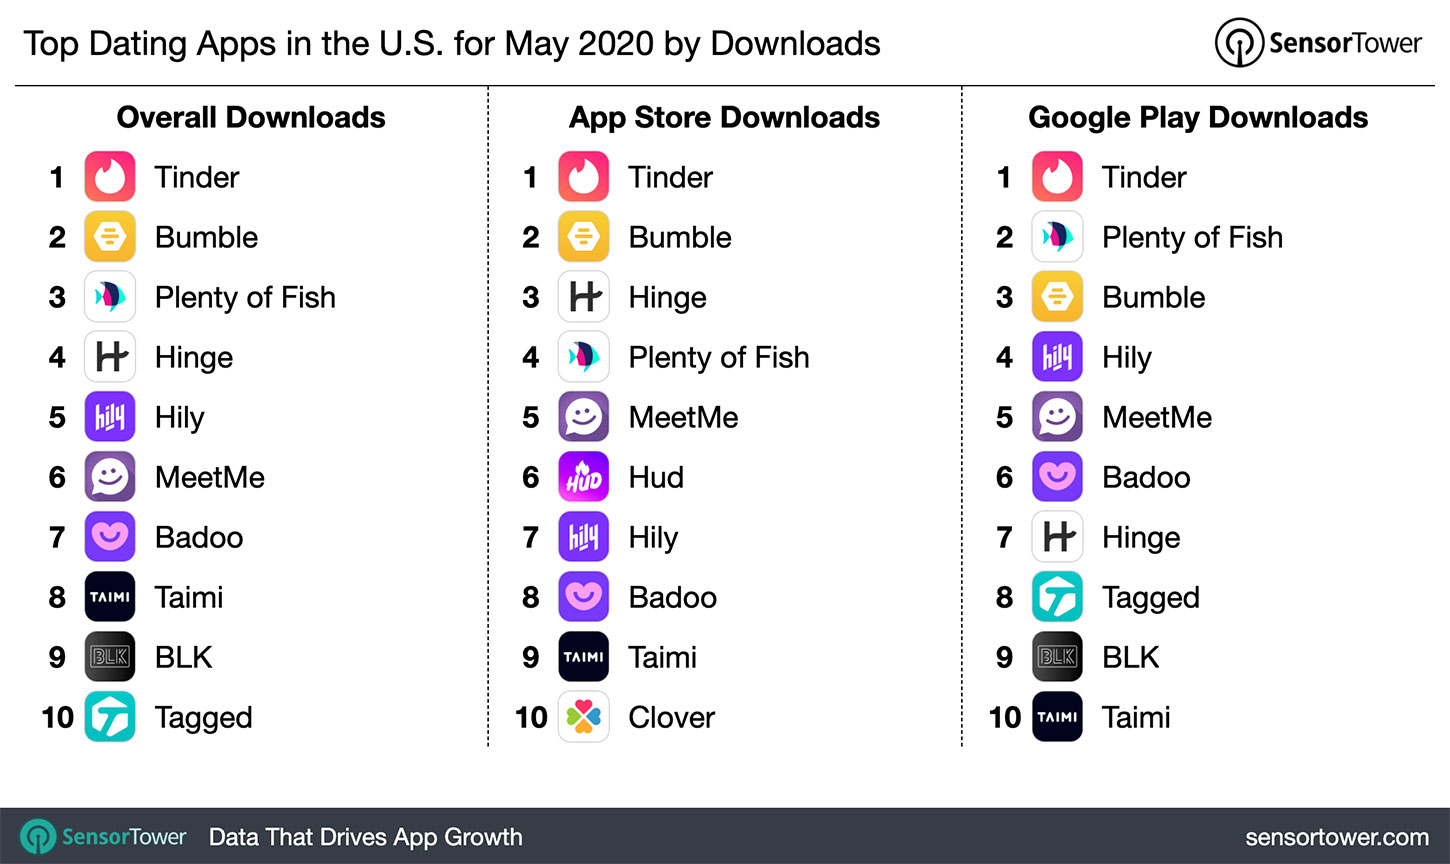 Top Dating Apps in the U.S. for May 2020 by Downloads